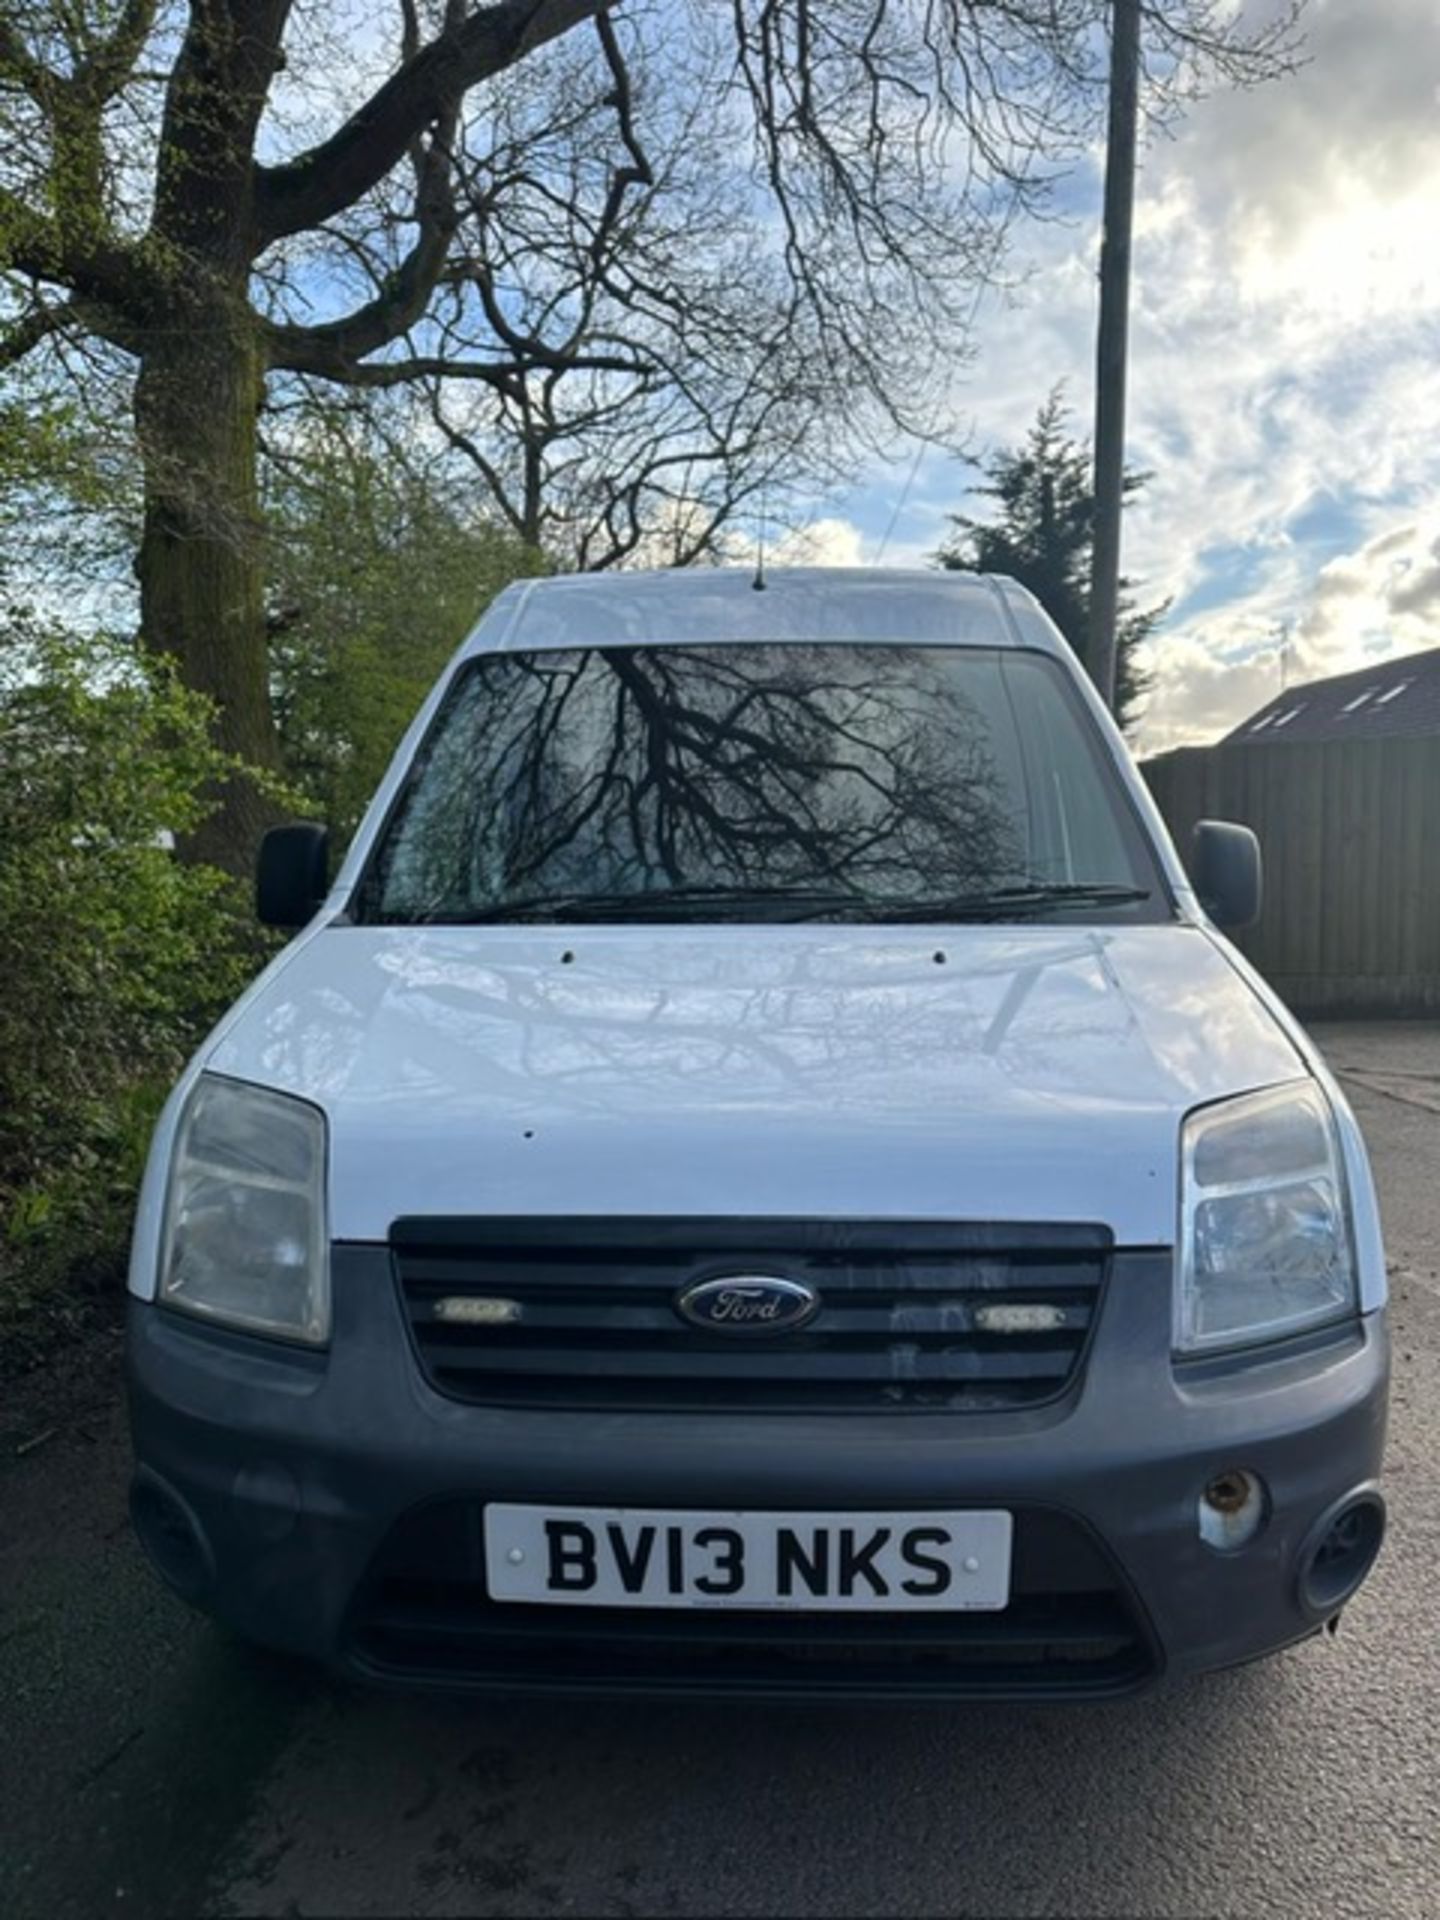 FORD TRANSIT CONNECT PANEL VAN REG:BV13 NKS 1.8LITRE. HIGH ROOF LWB. 83K REC MILES APPROX. WITH V5 A - Image 3 of 26